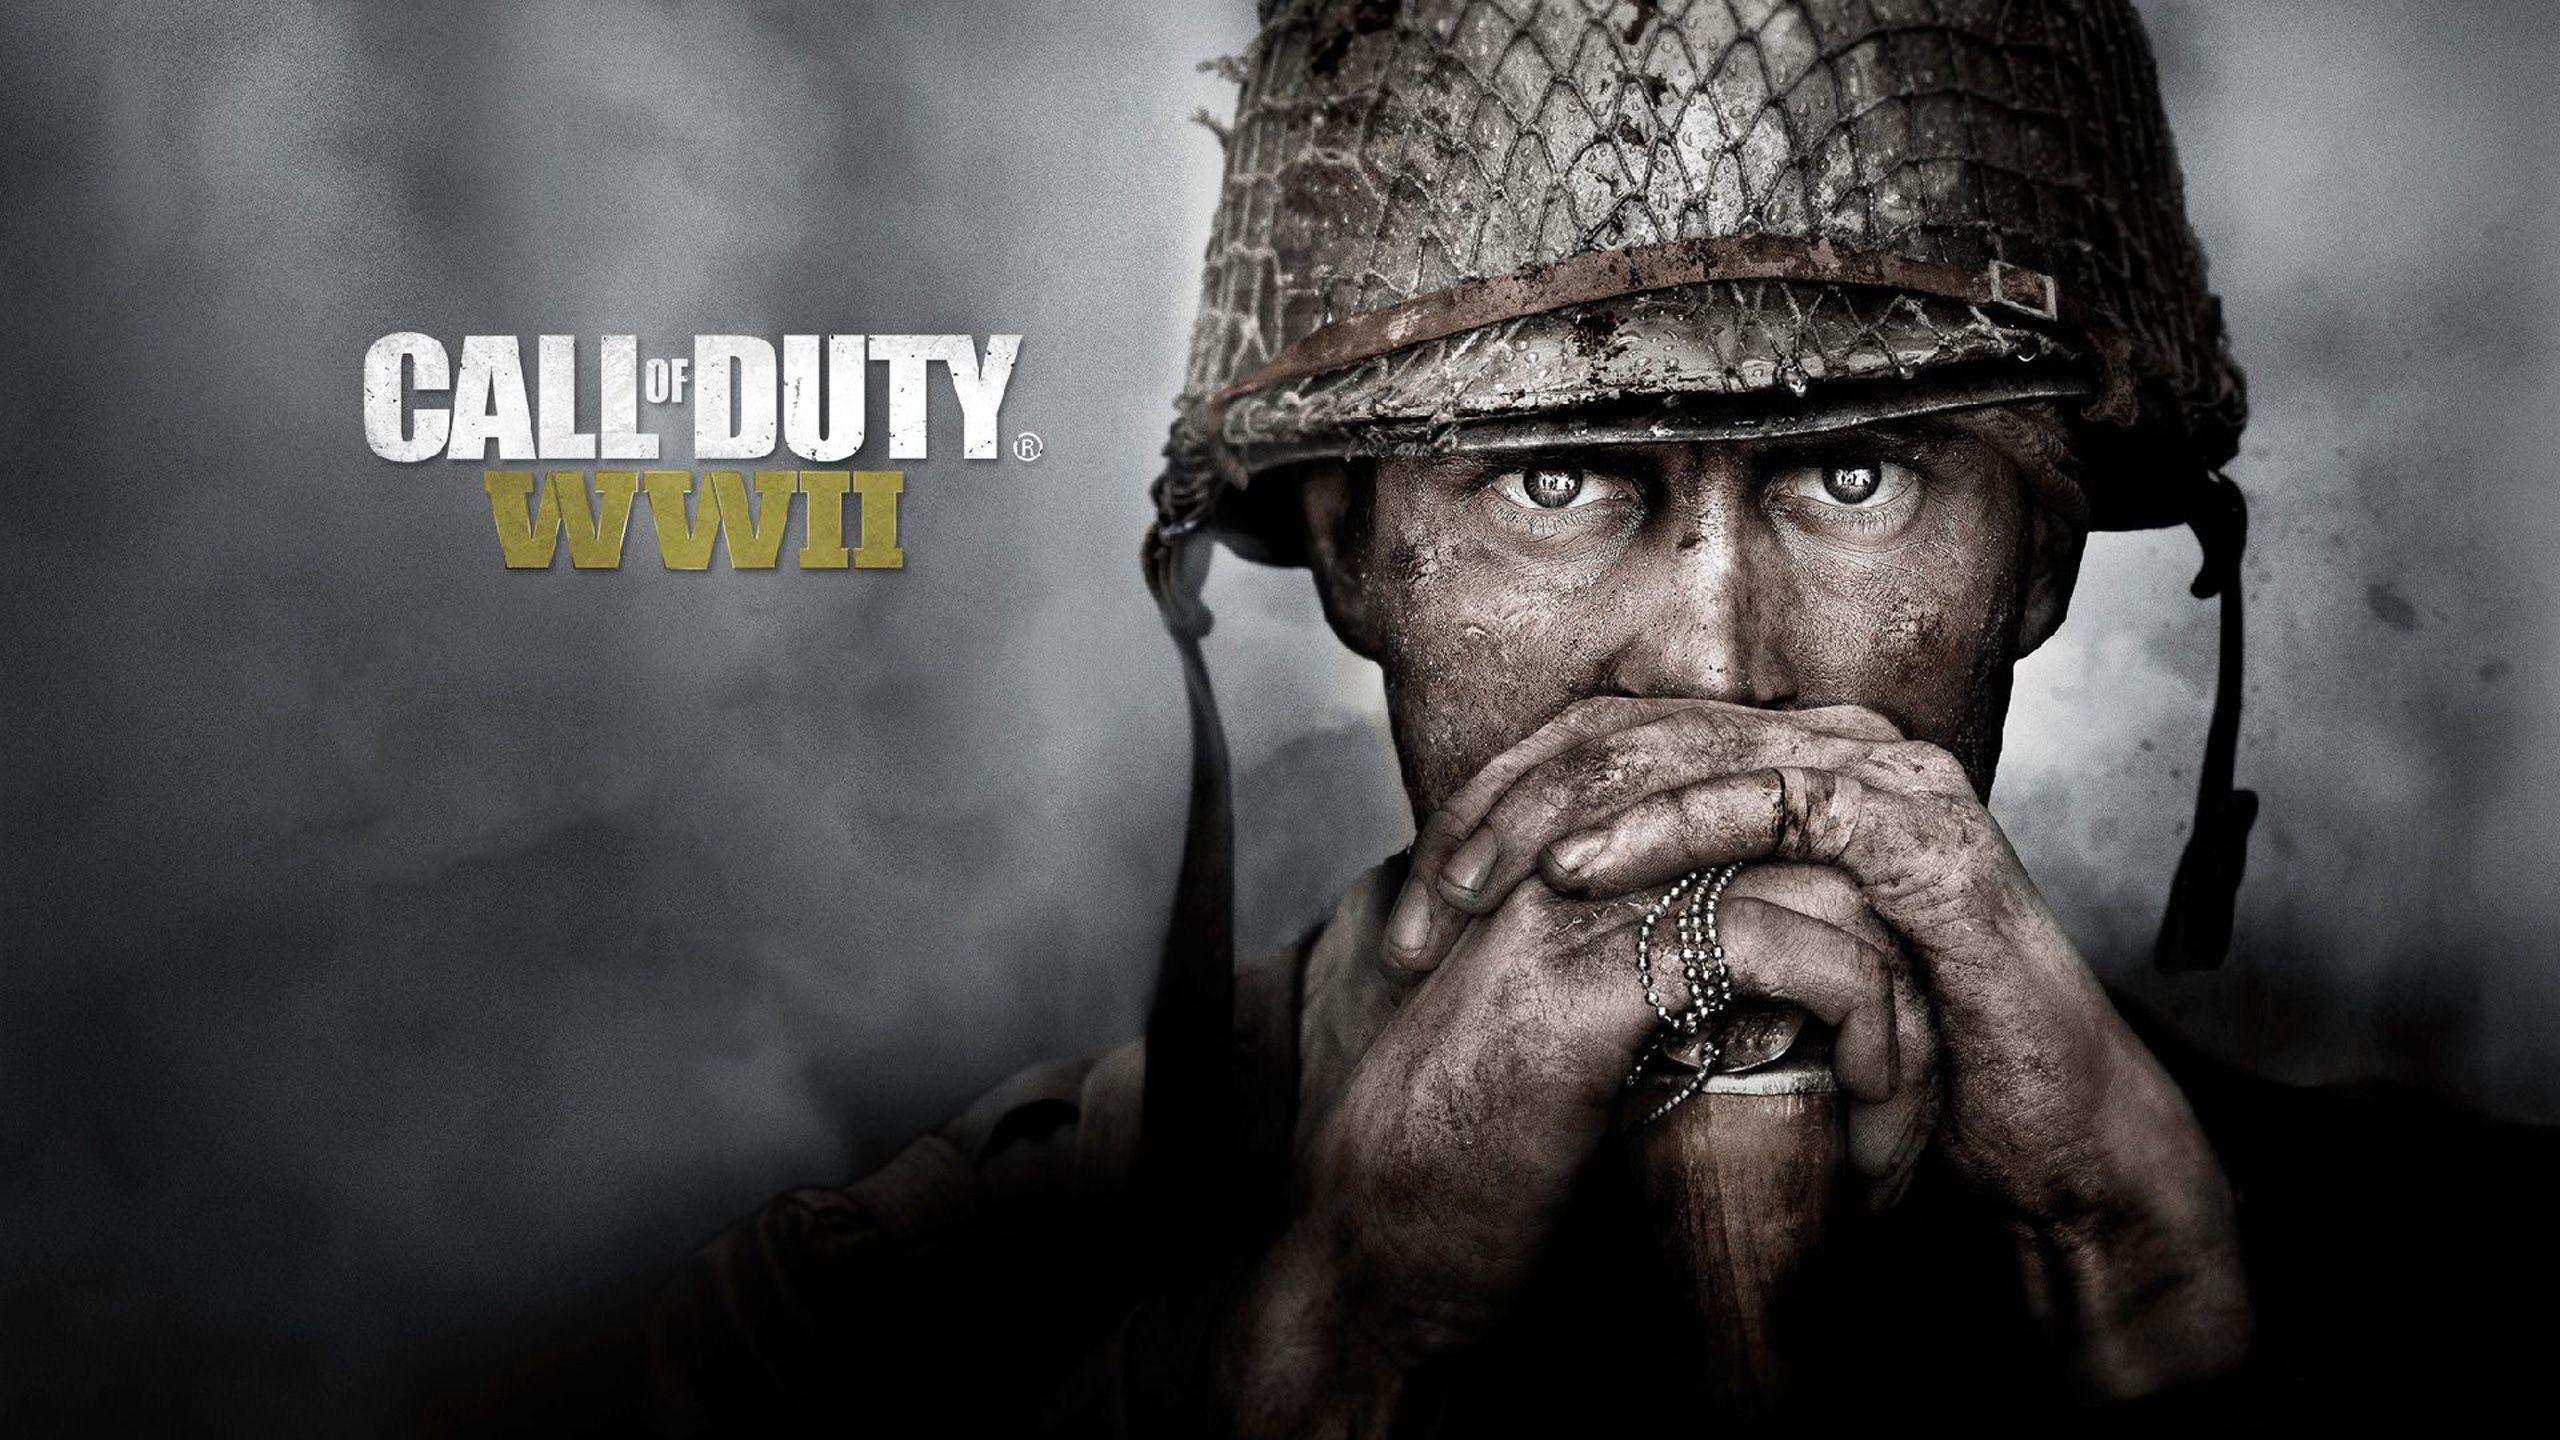 Call Of Duty WWII, HD Games, 4k Wallpaper, Image, Background